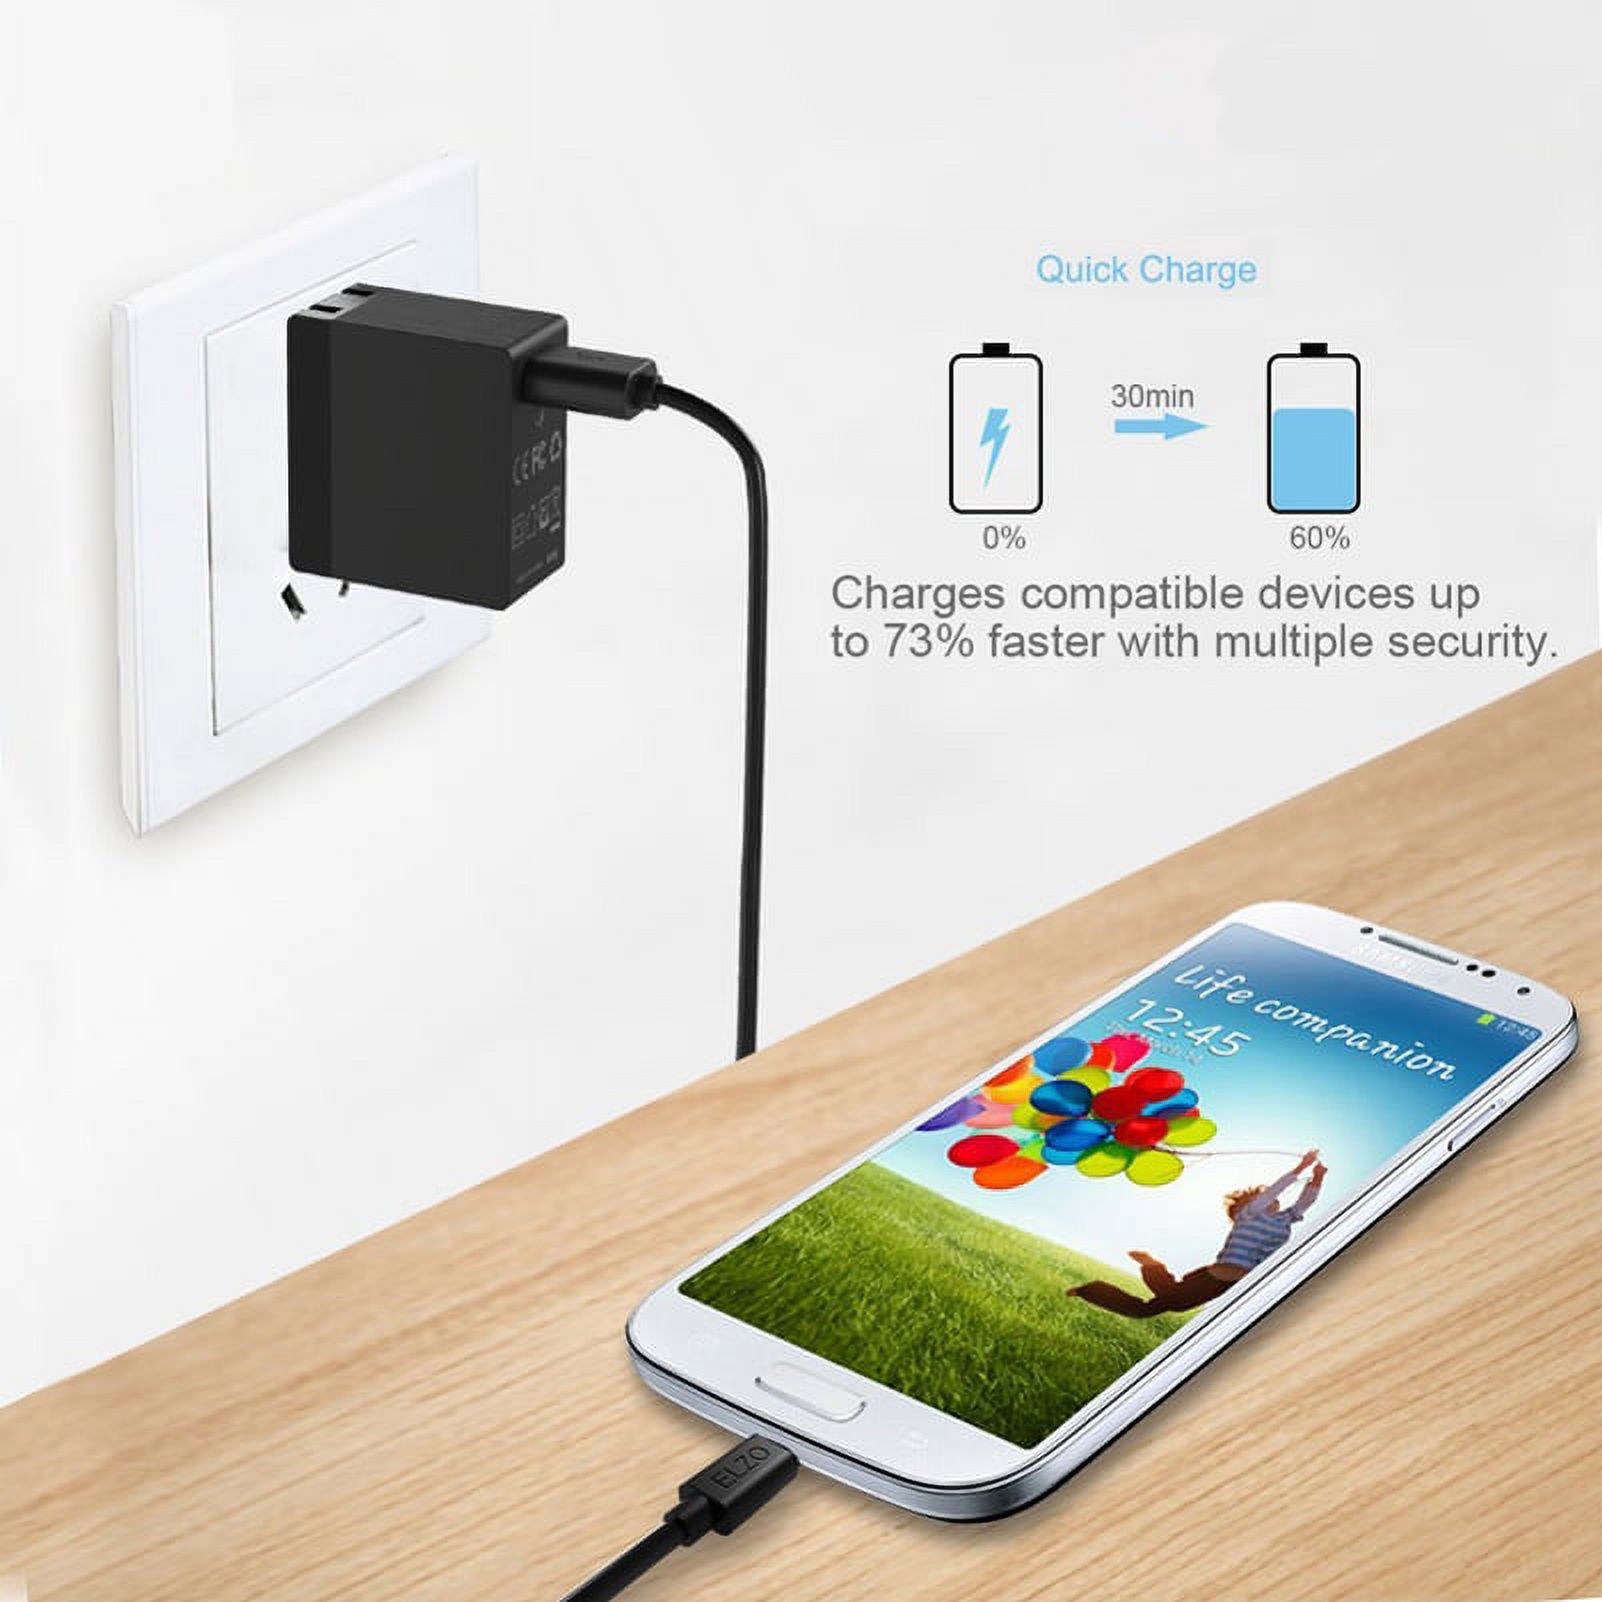 USB 18W Fast Home Charger Quick Charge Port Travel Wall AC Plug Z4W for Lenovo Moto Tab (10.1) - LG G5, K40 K7 K10, V20, G6, Q6, V30, K30, G Pad X8.3 F 8.0, V50 ThinQ 5G, V40 ThinQ, V35 ThinQ - image 5 of 6